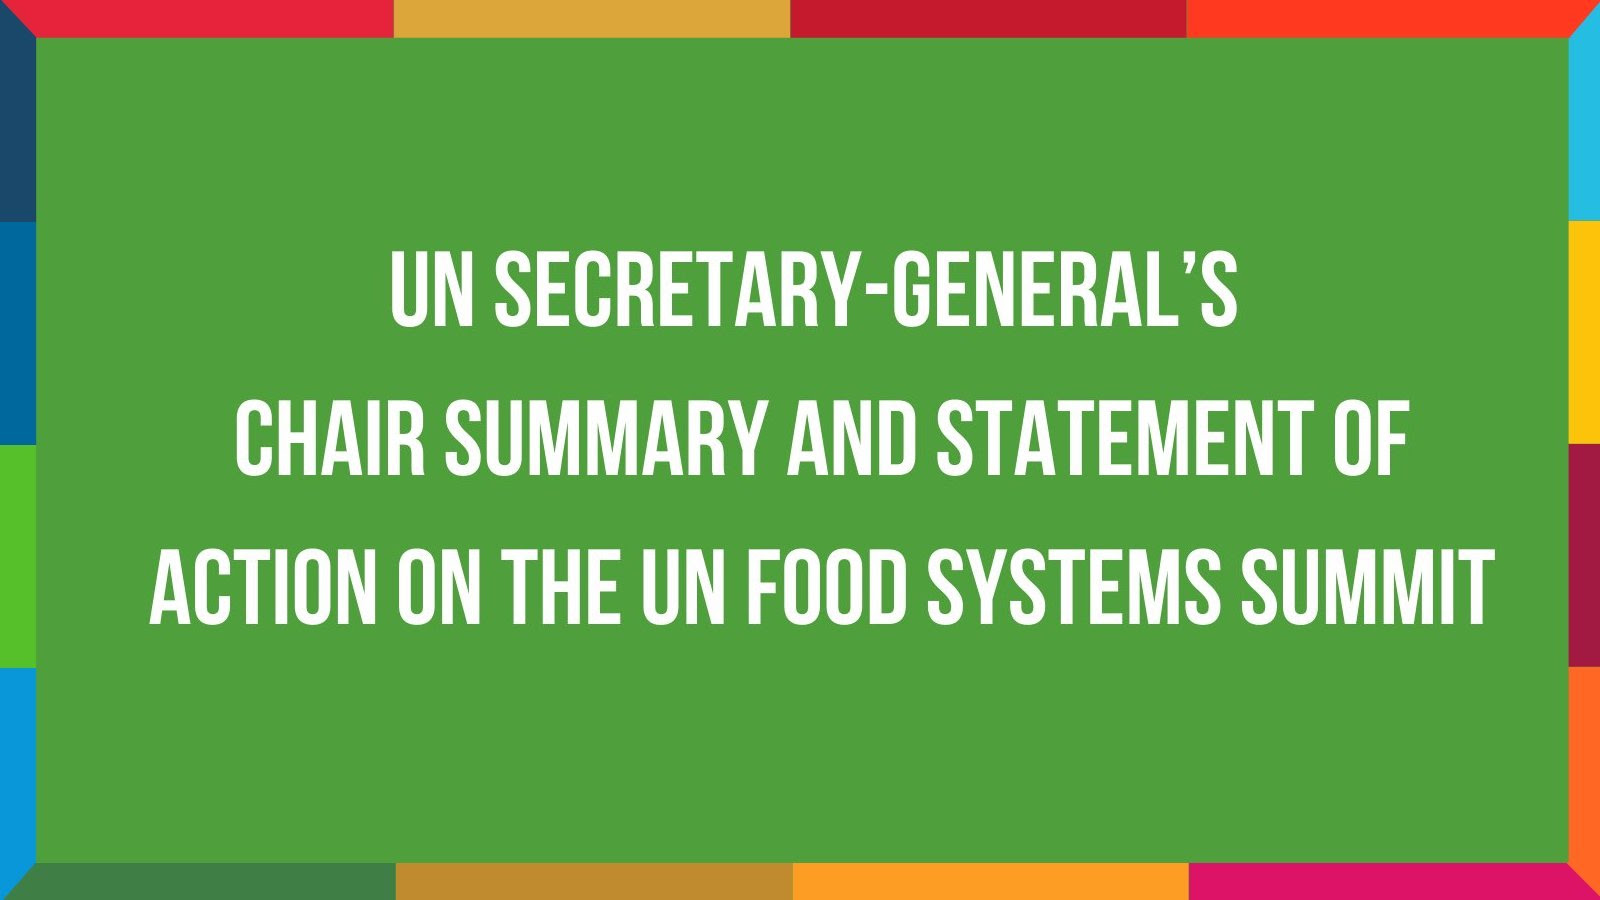 Secretary-General's Statement of Action